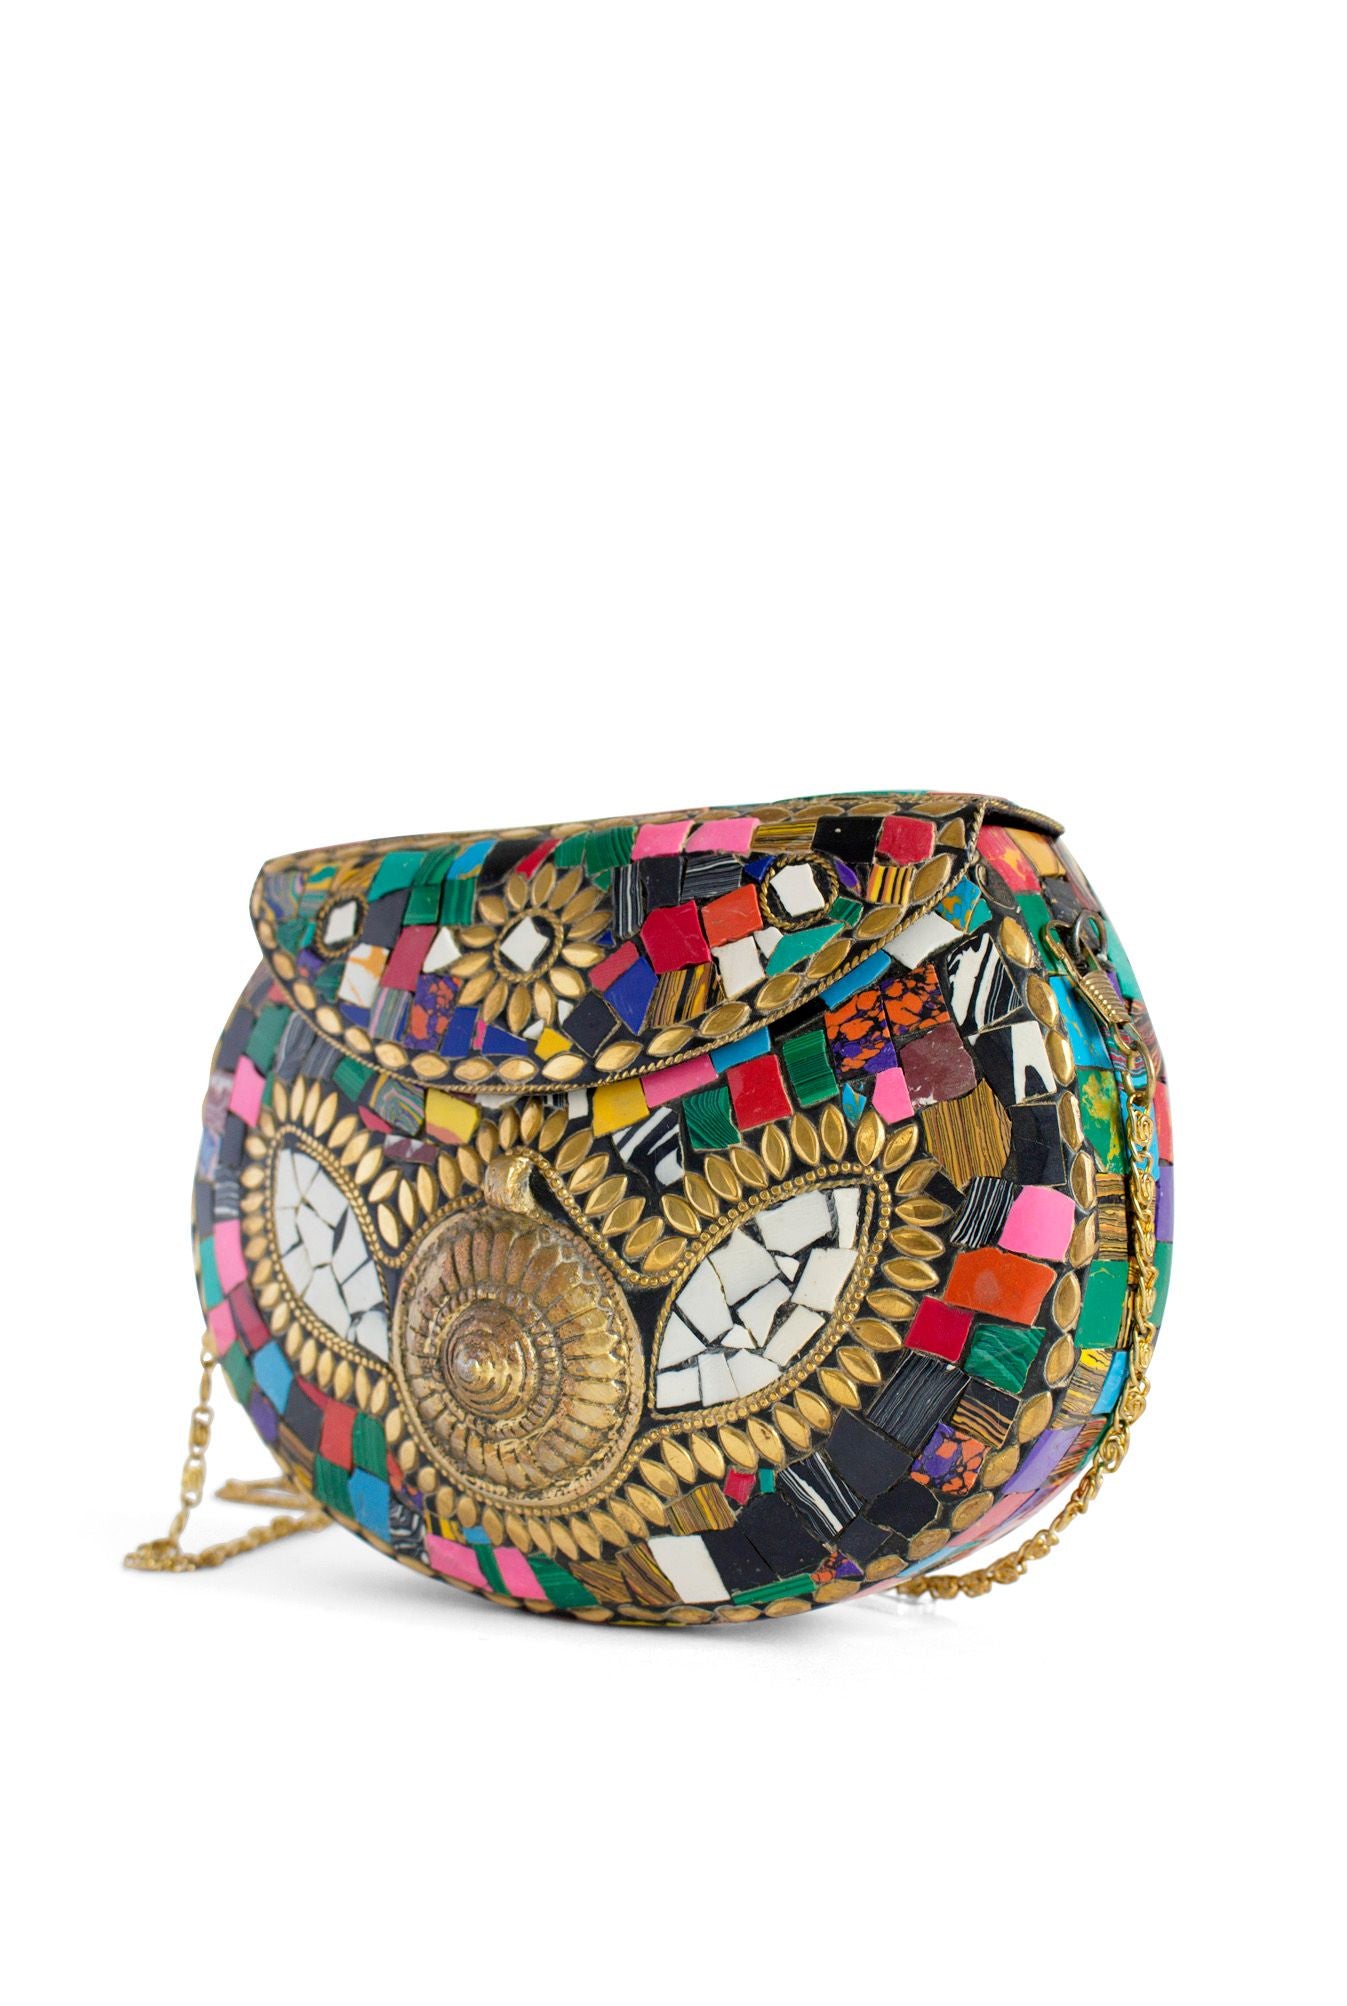 Quirky Vintage Clutch with Multi-colored Stone Inlay